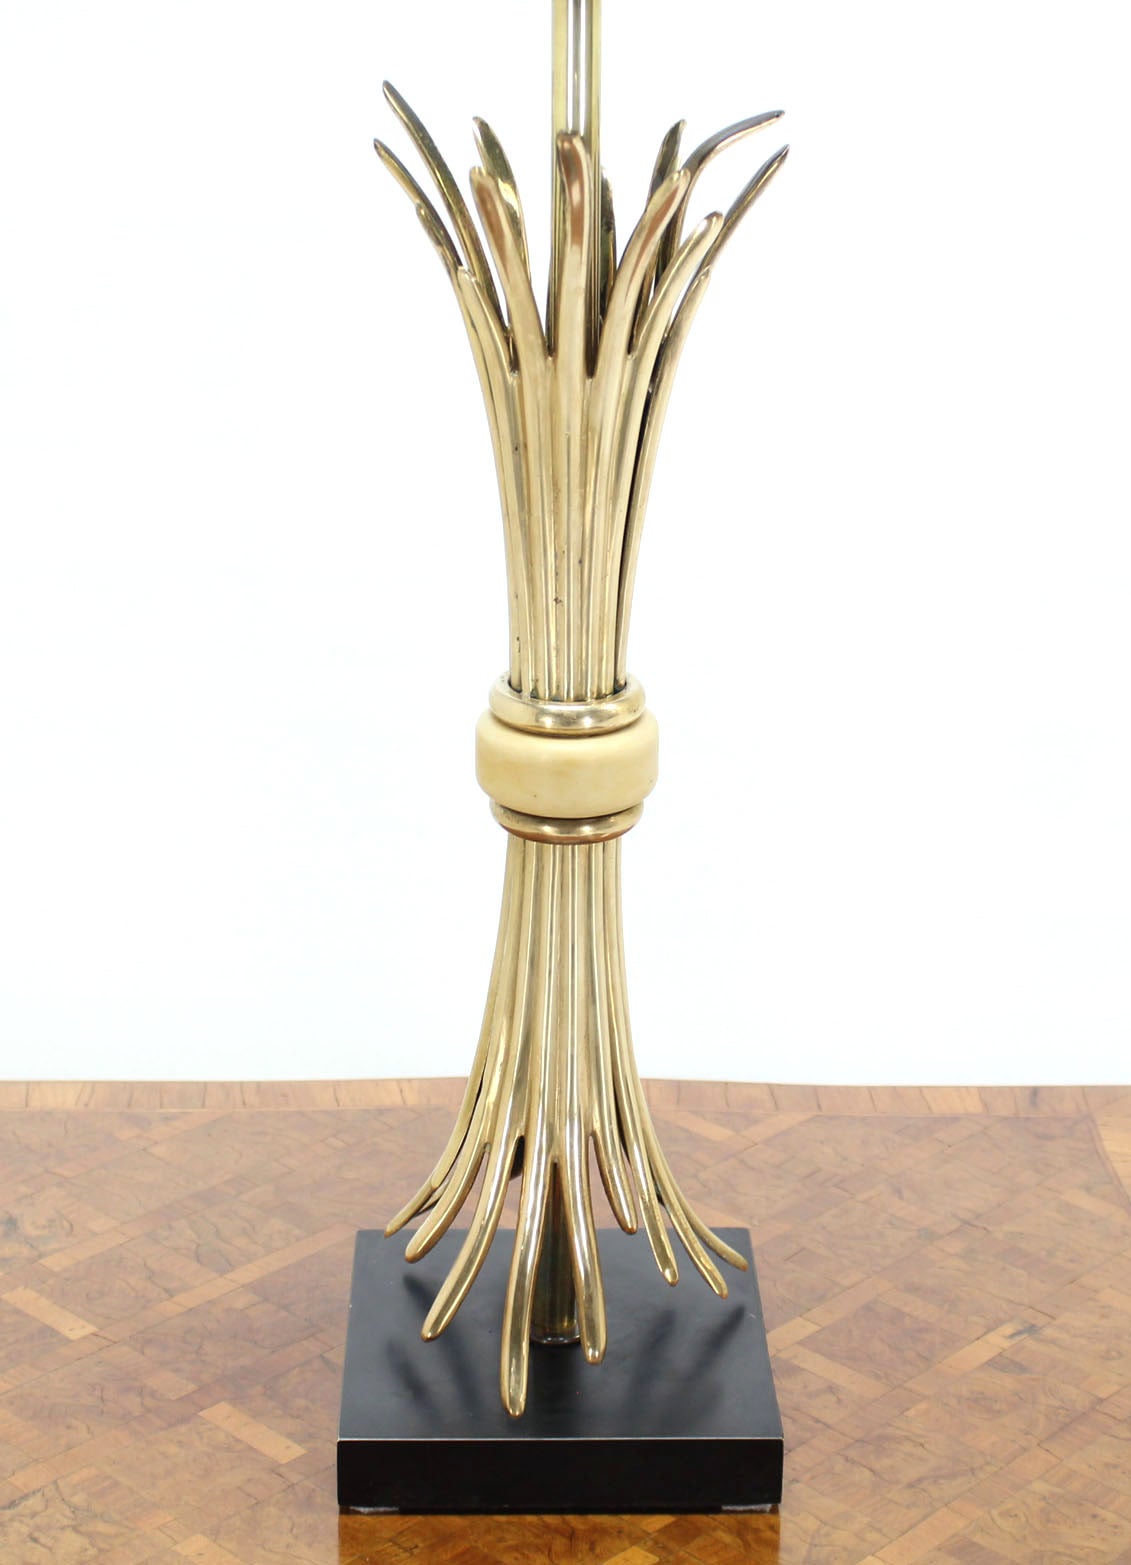 Gold or Brass Wheat Sheaf Base Table Lamp by Chapman 1